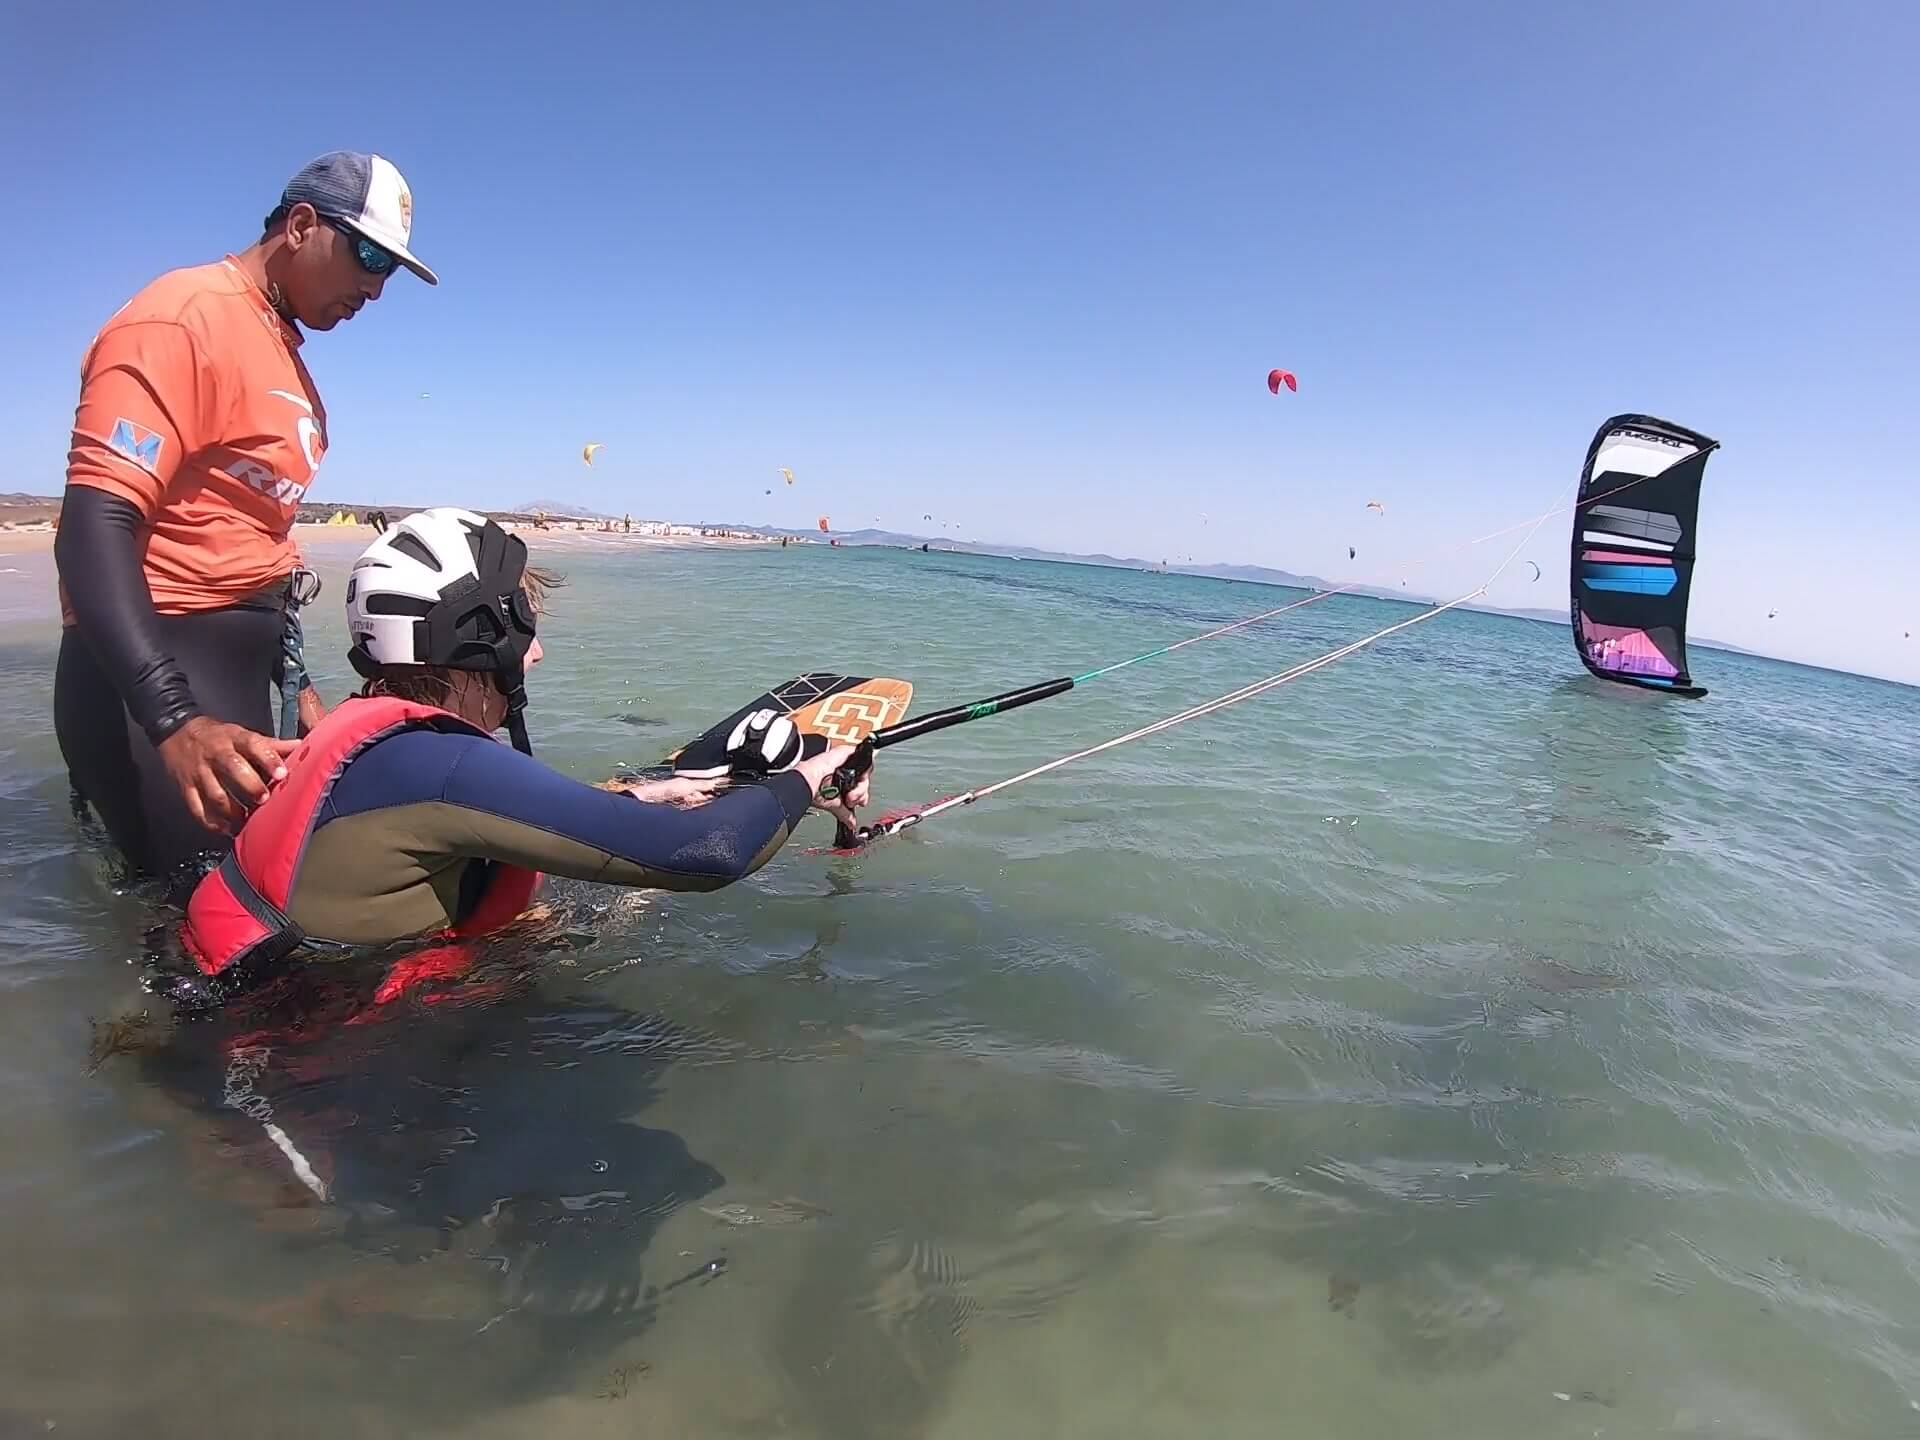 How long does it take to learn how to kitesurf?